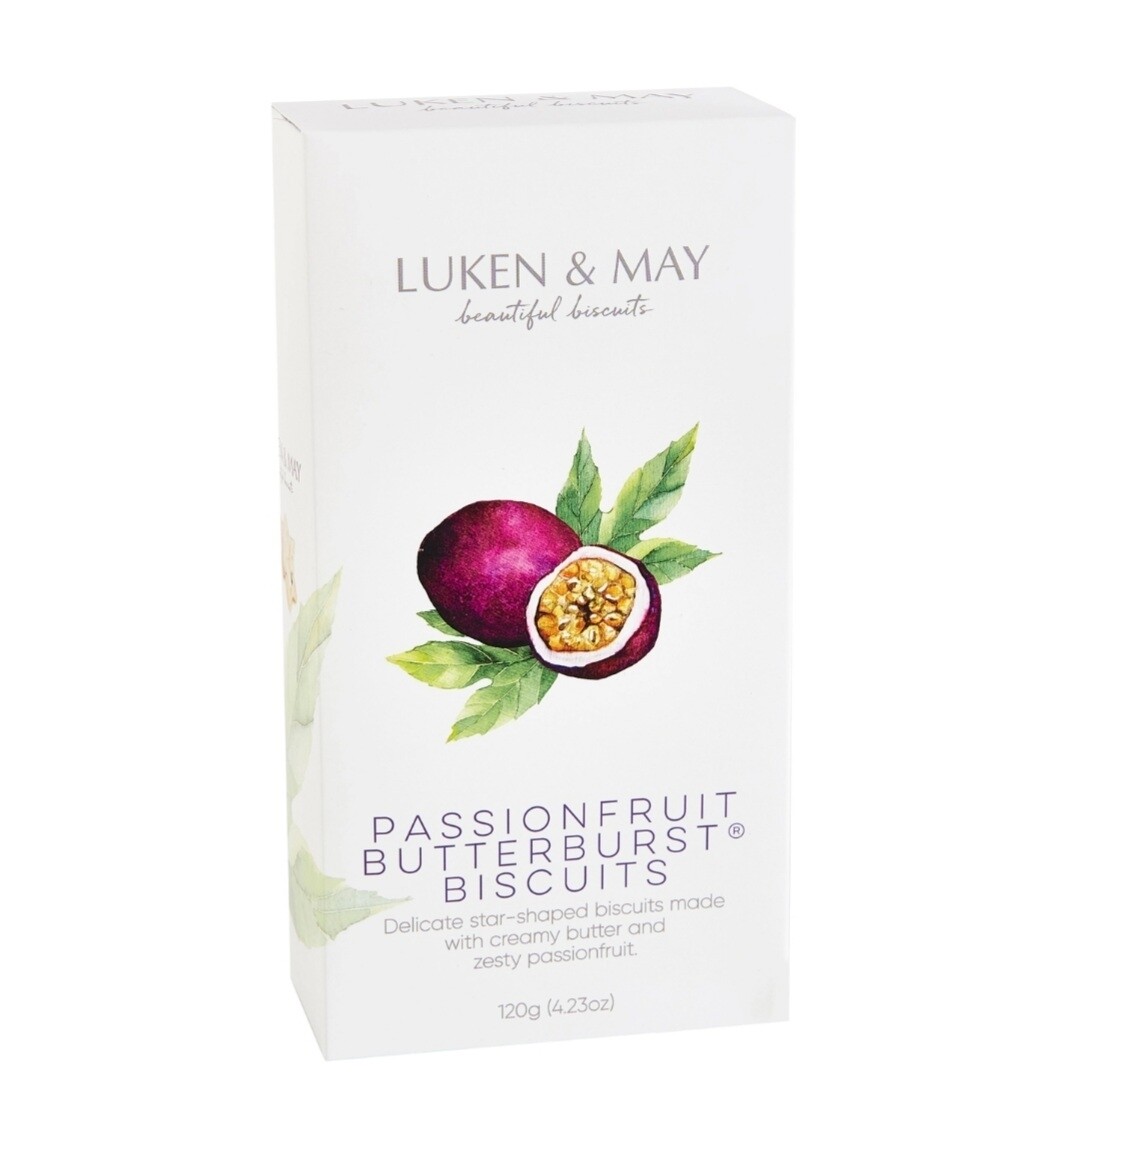 Luken & May Gift Box Passionfruit Butterburst Biscuits 120g